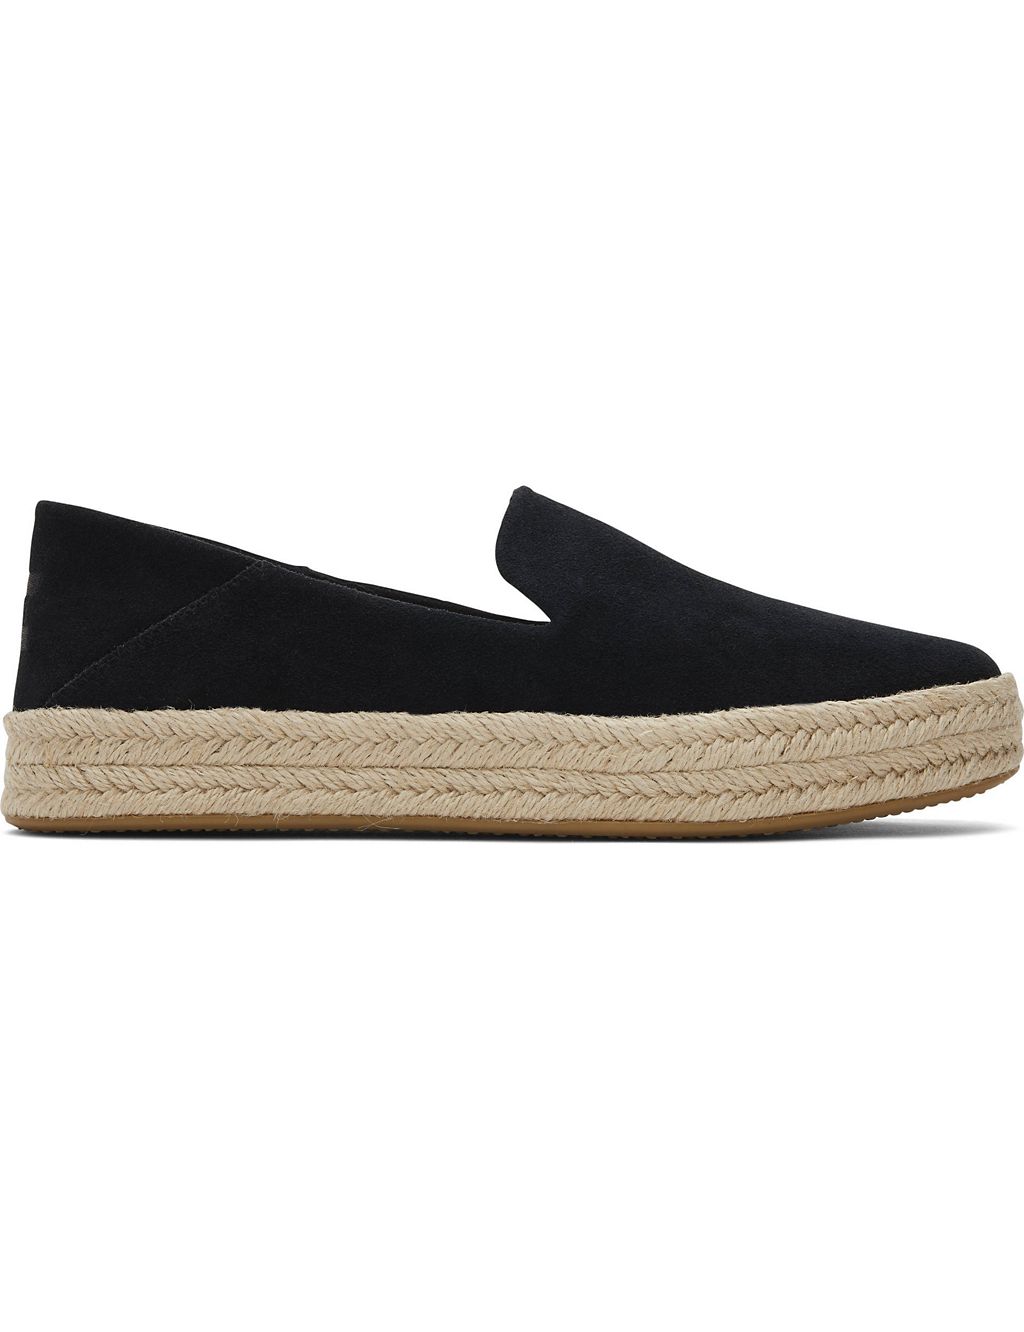 Leather Flat Espadrilles 2 of 7